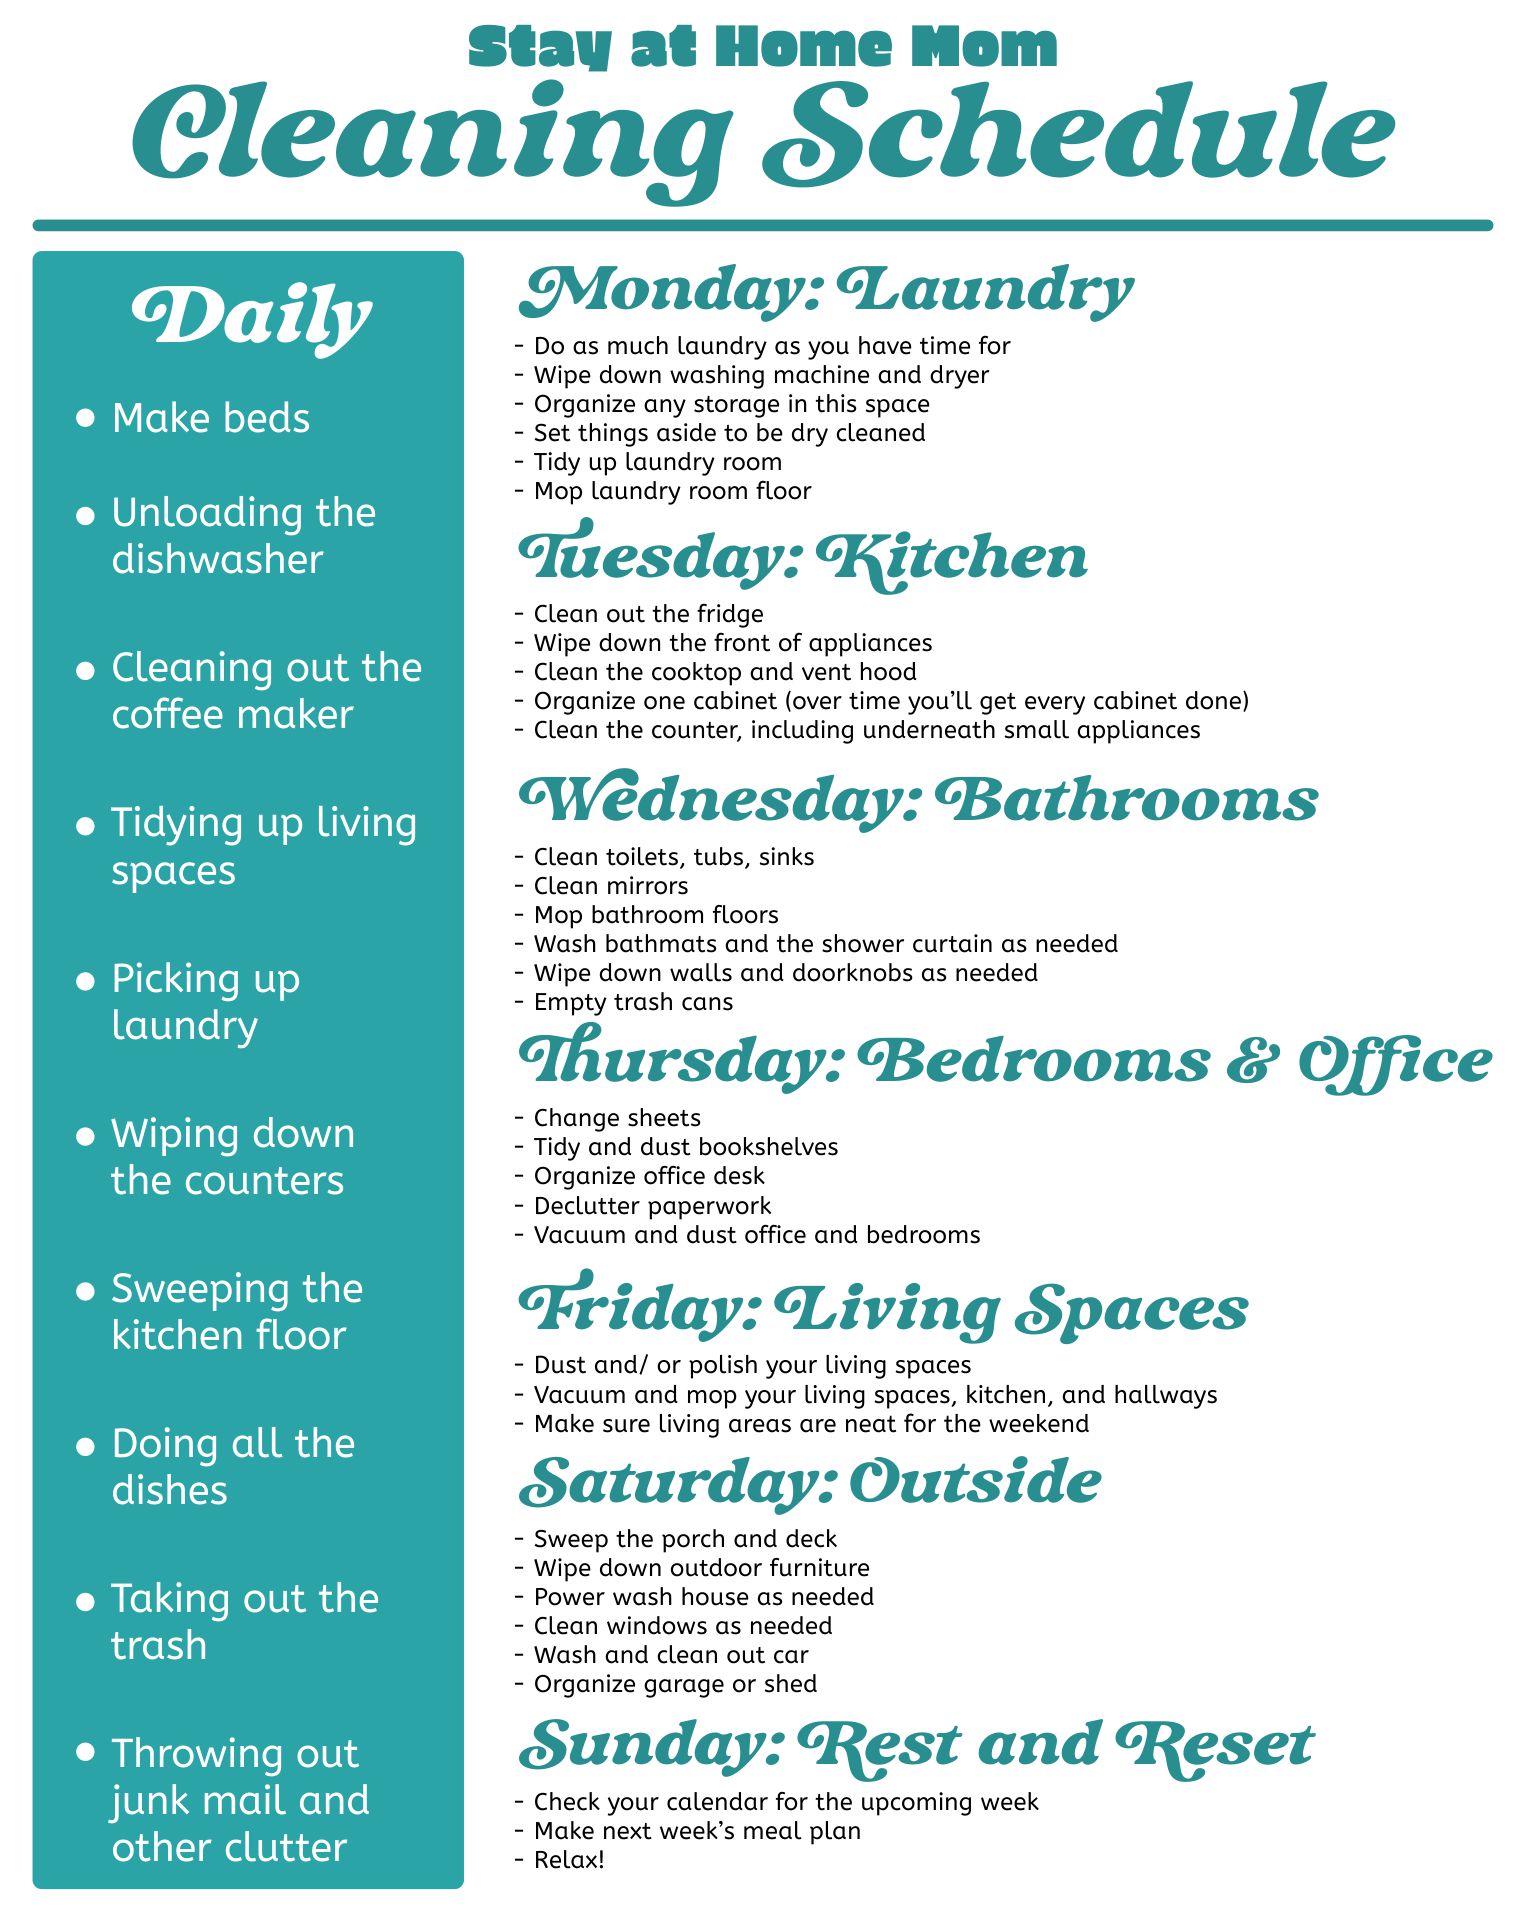 Daily Cleaning Schedule